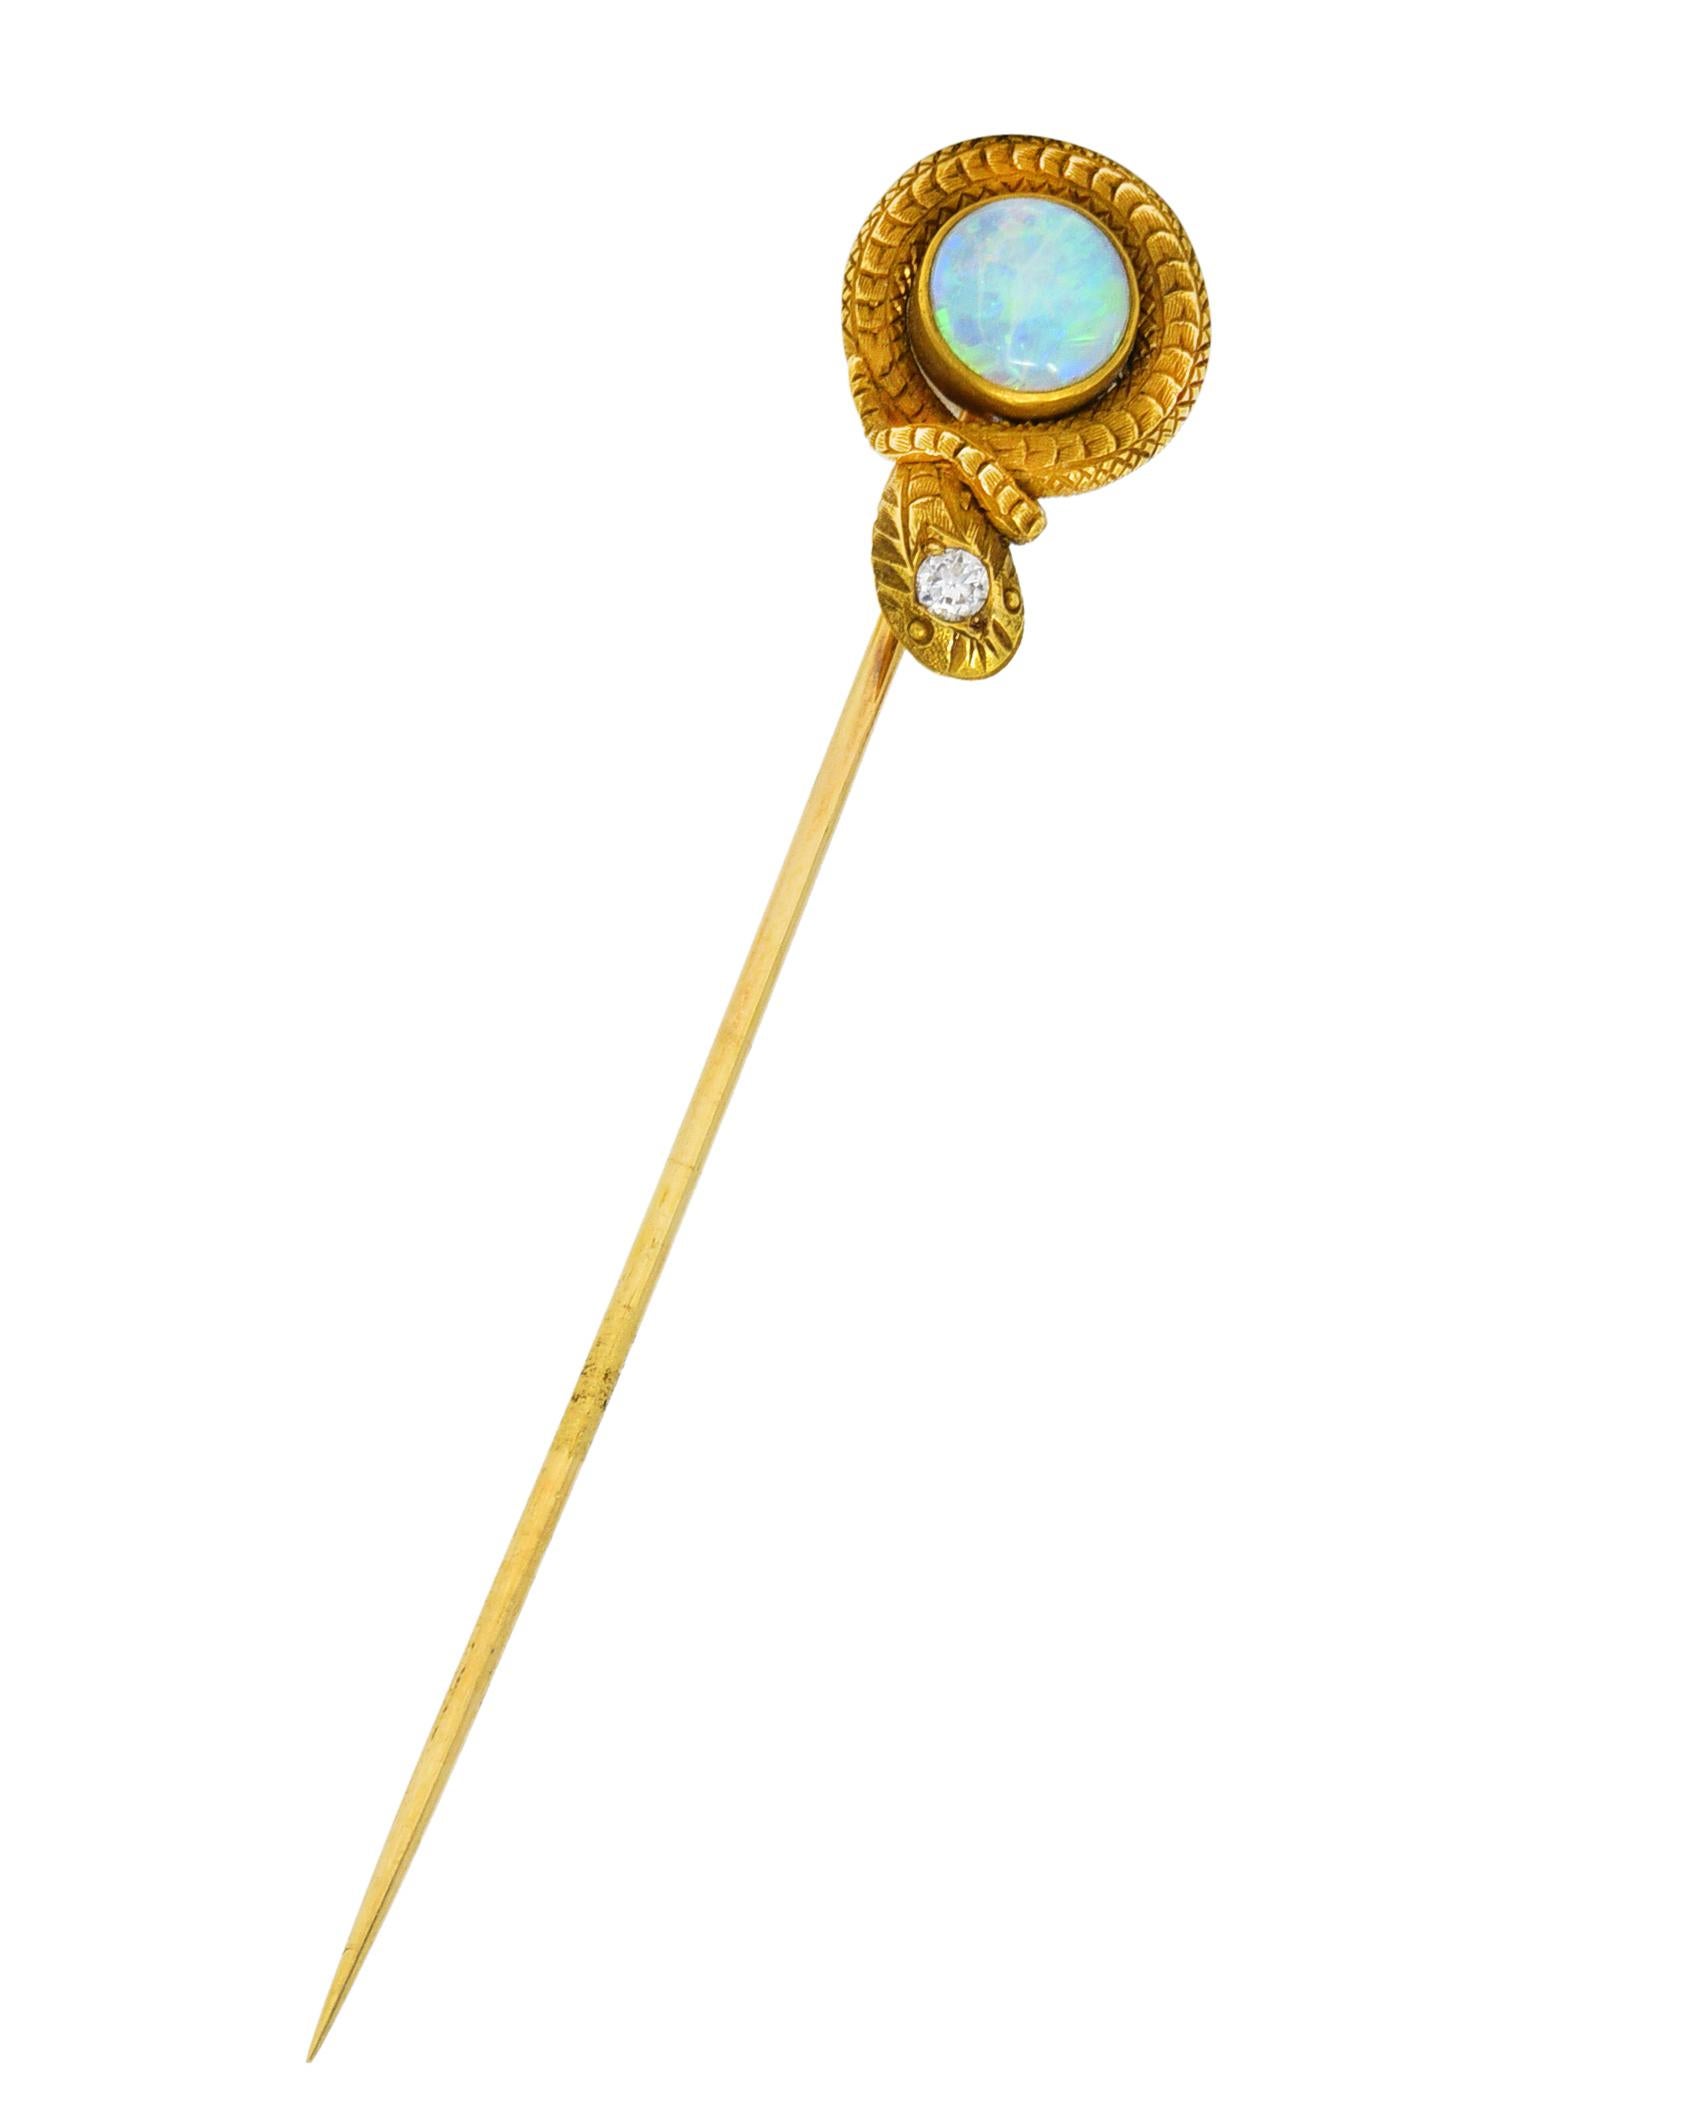 Stickpin is designed as a stylized snake with texturous scales and expressive features. Coiled around a bezel set 6.5 mm round opal cabochon. Translucent white in body color with excellent spectral play-of-color. Accented by an old European cut